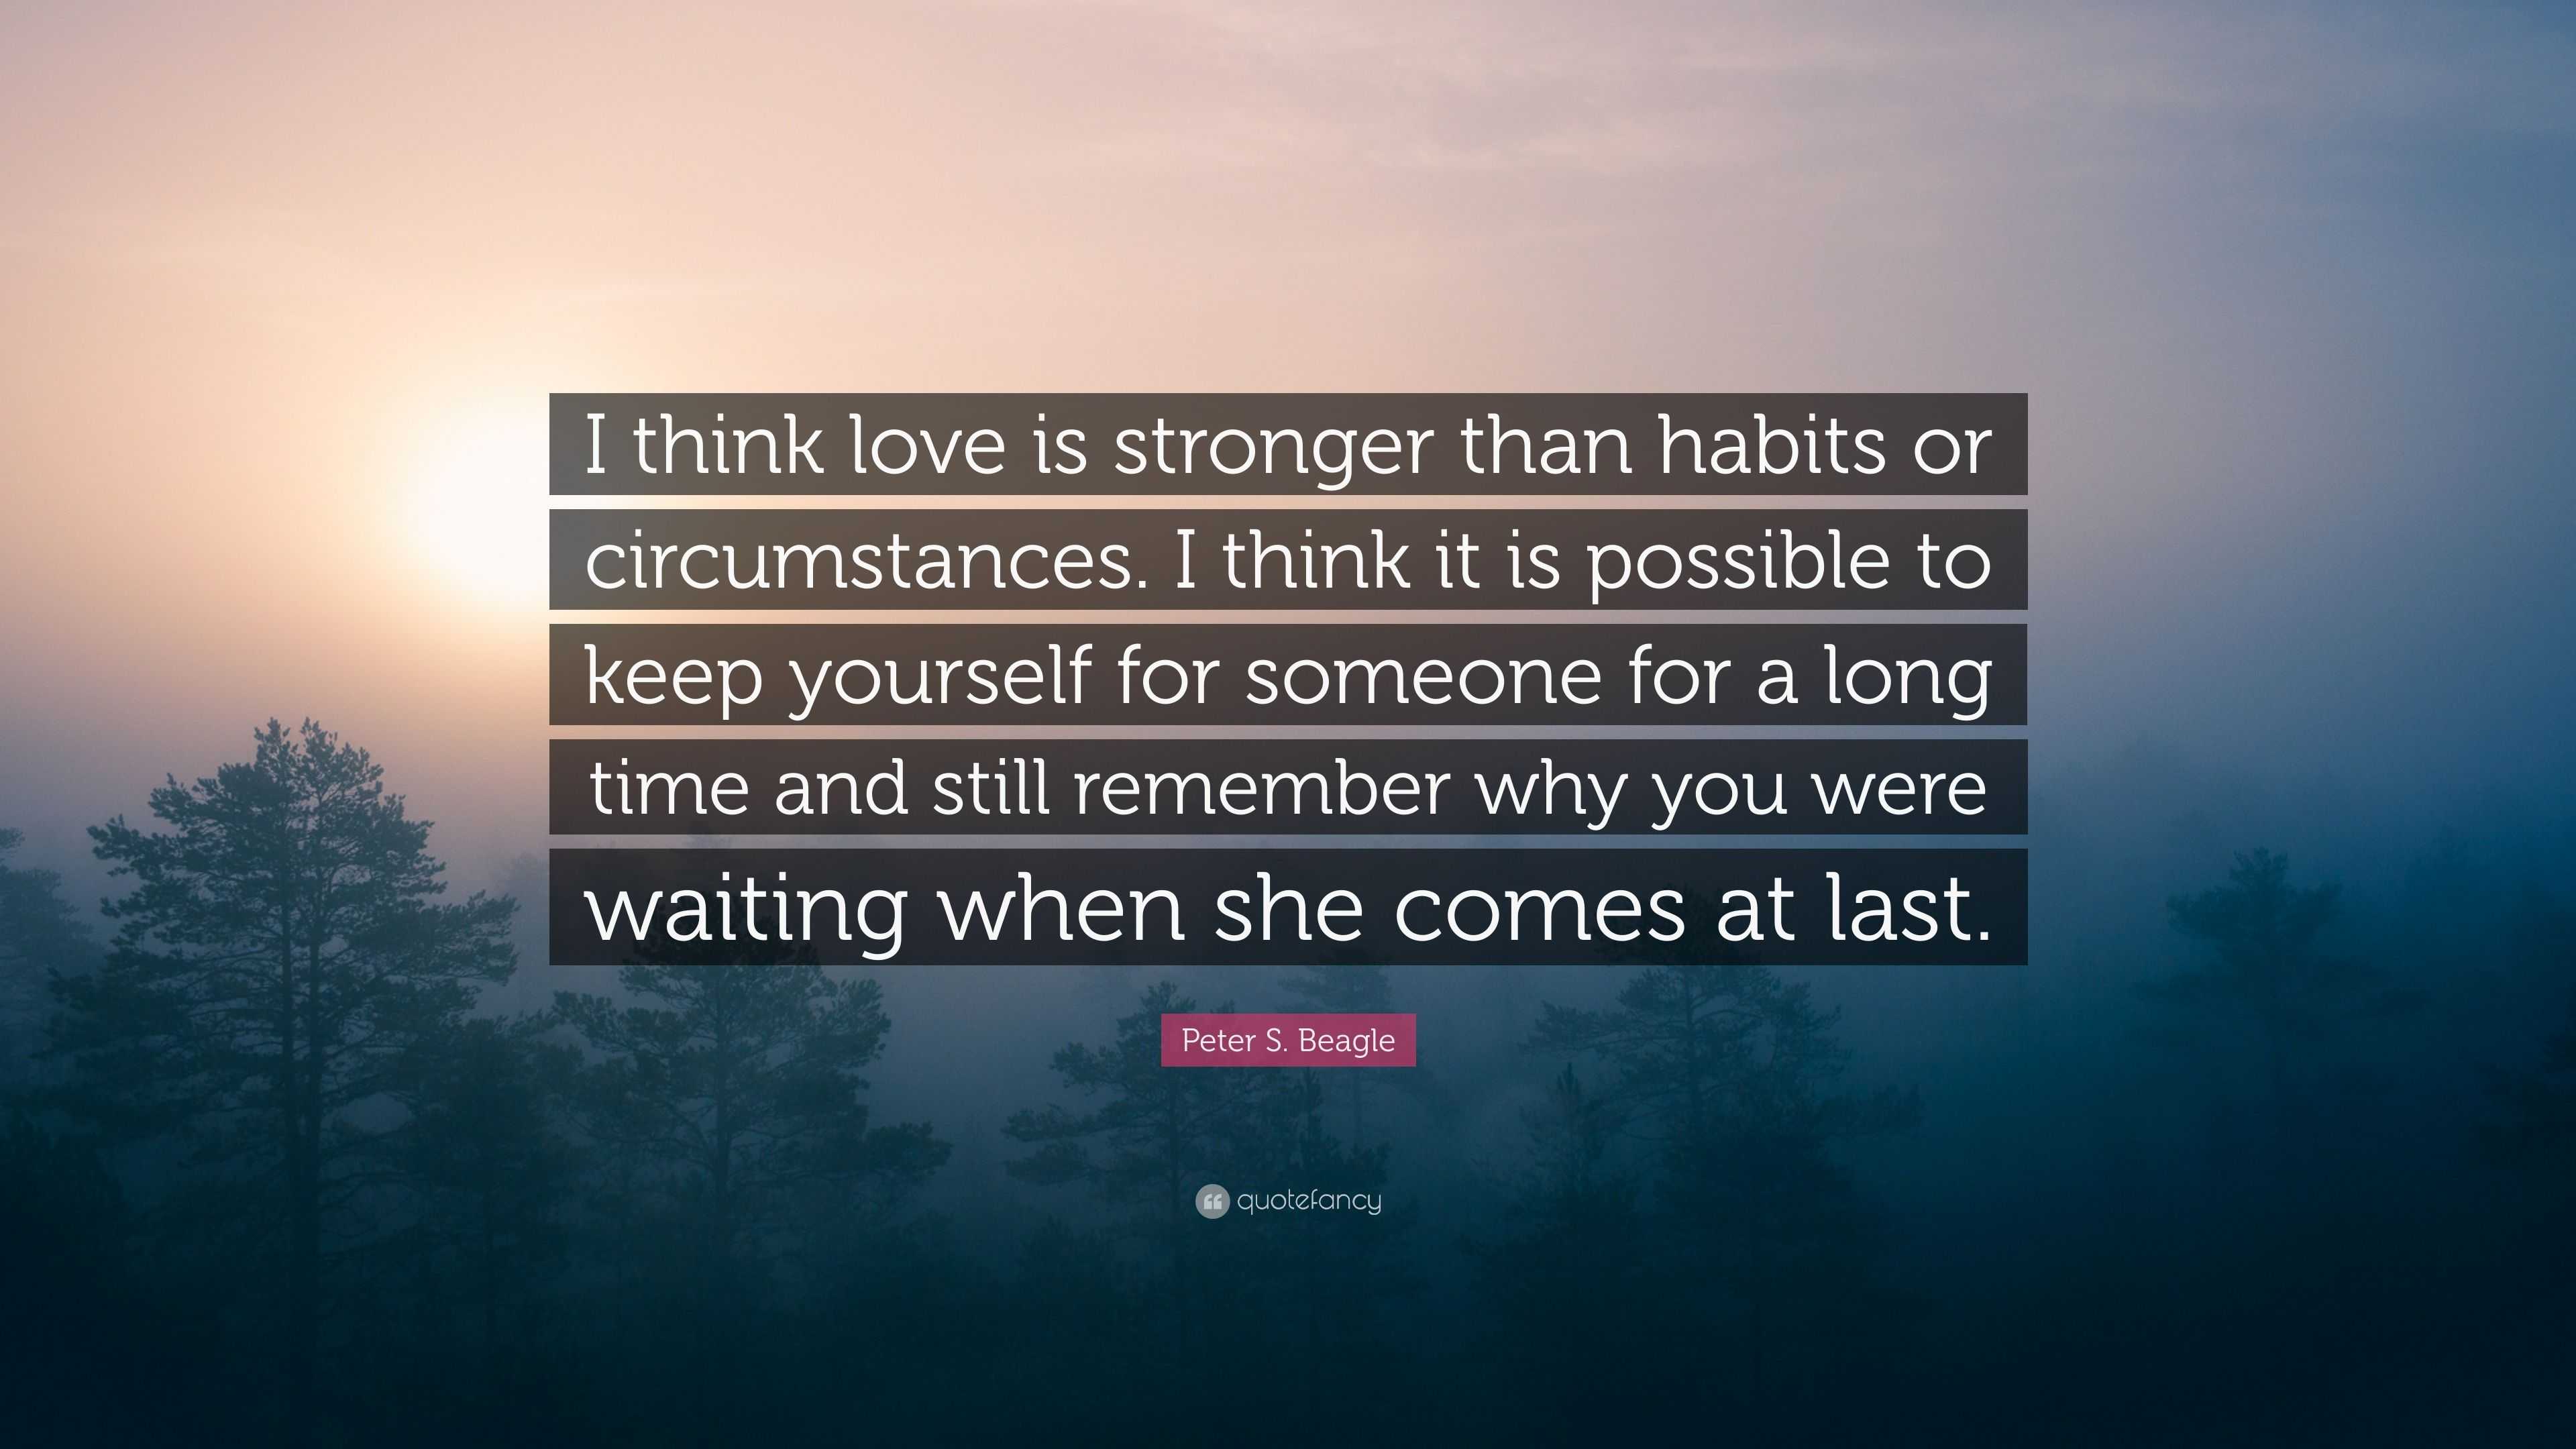 Peter S Beagle Quote “I think love is stronger than habits or circumstances